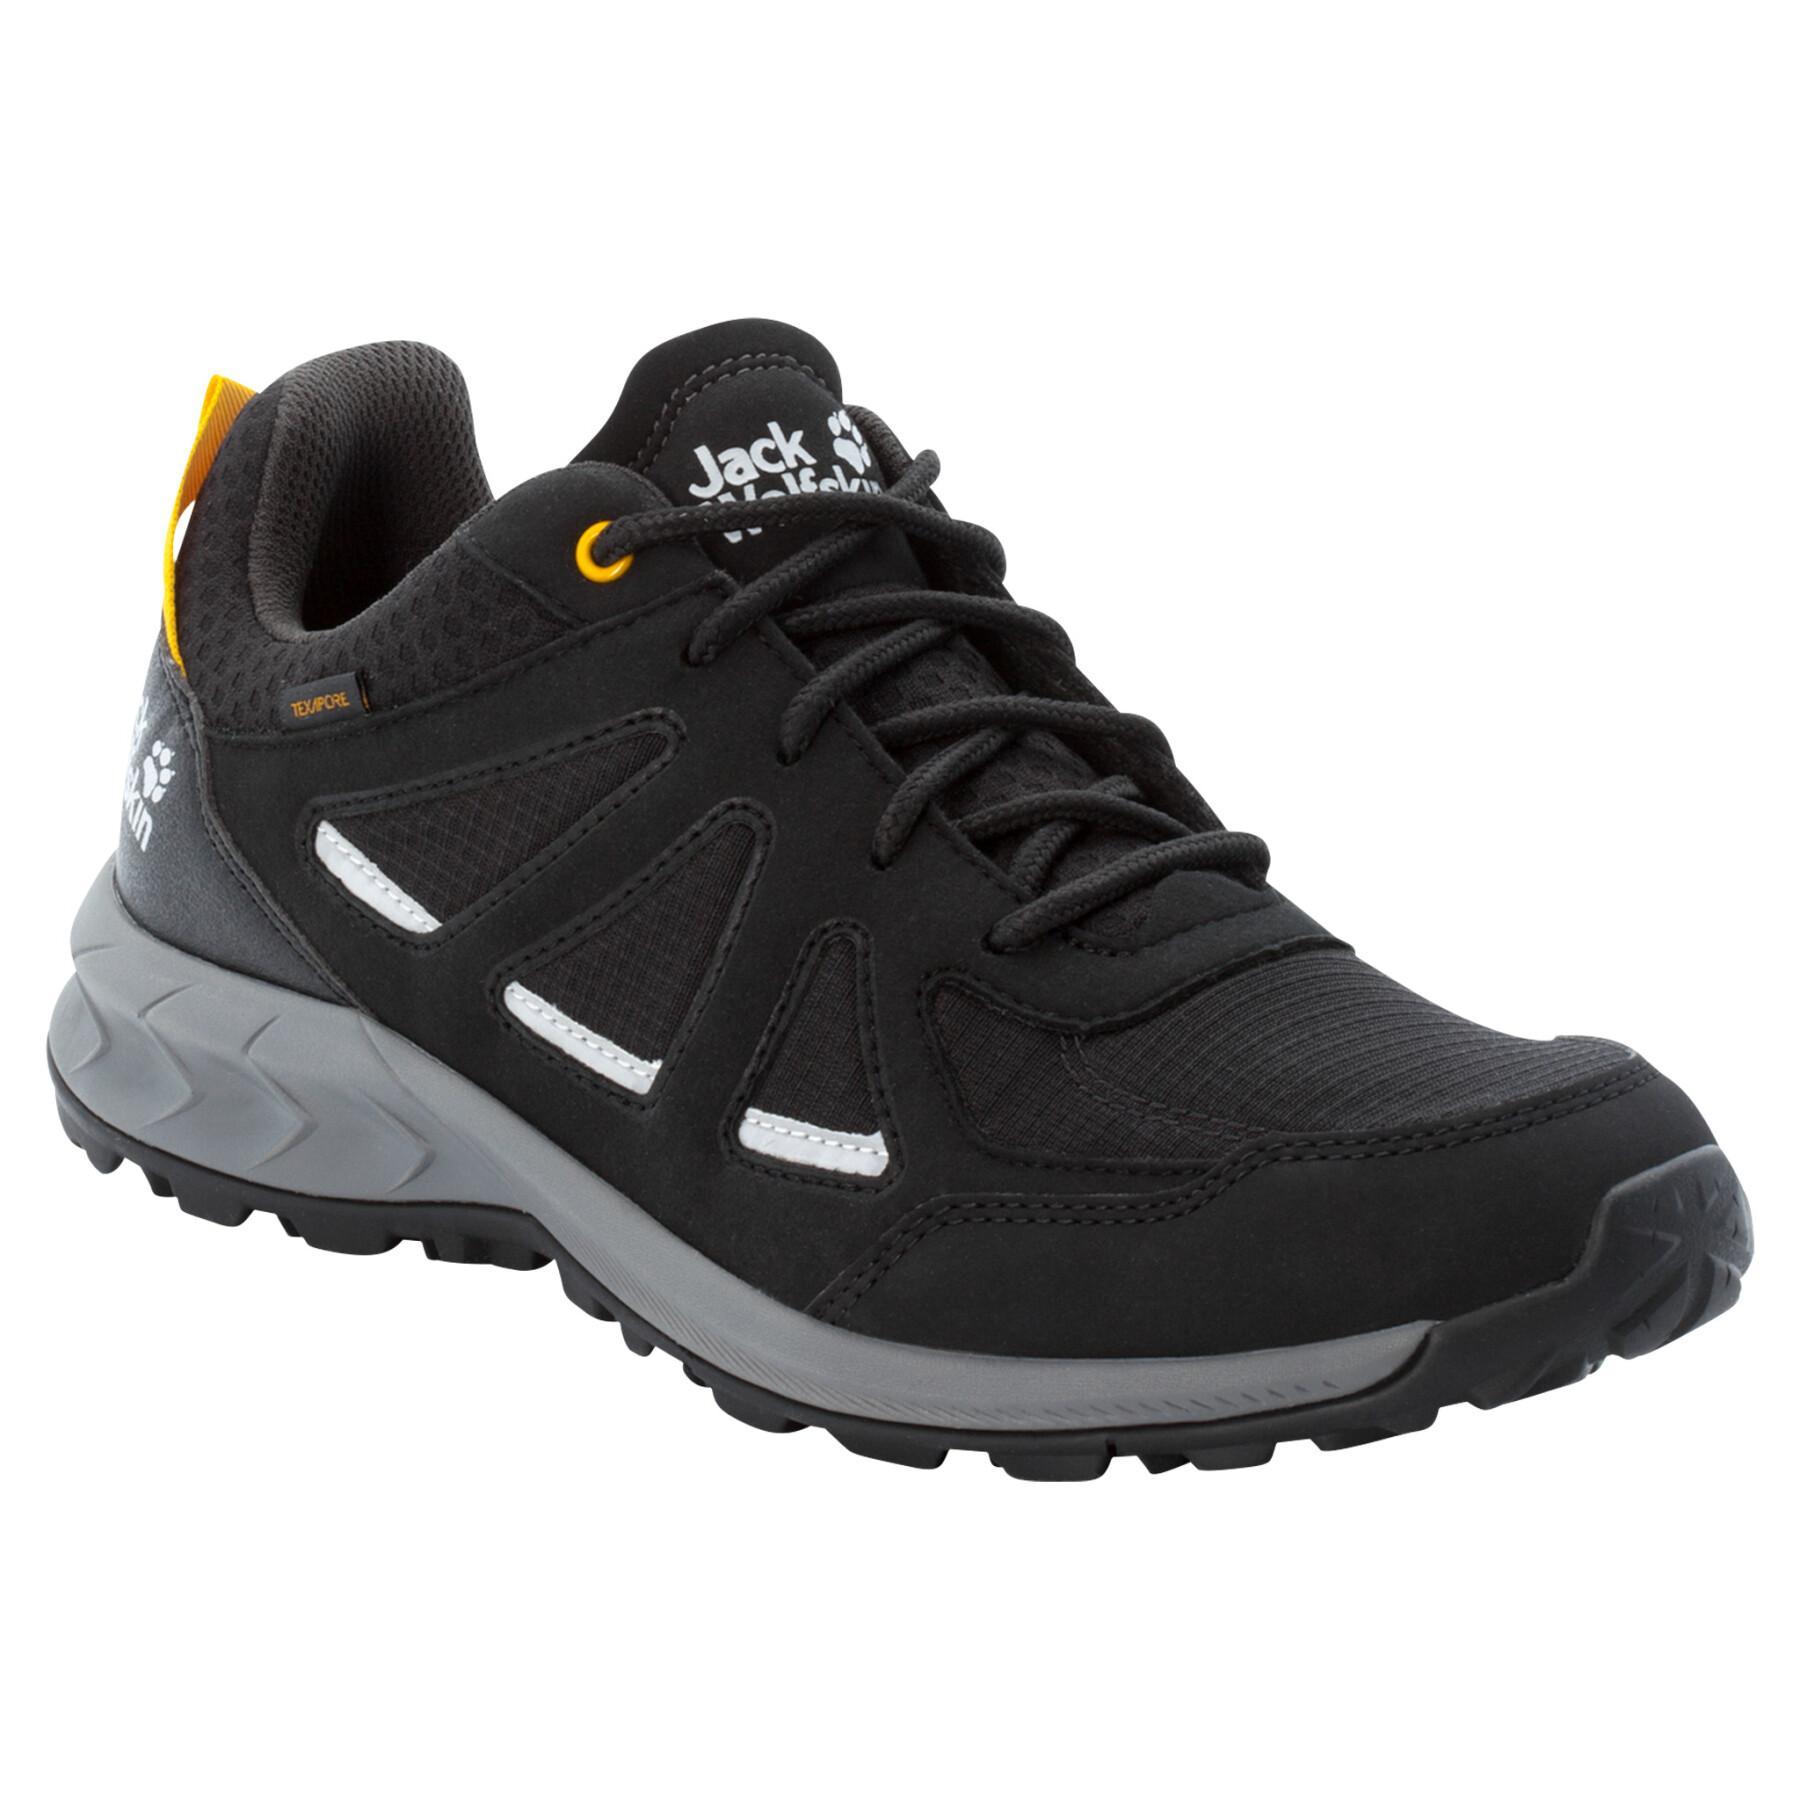 Hiking shoes Jack Wolfskin Woodland 2 Texapore Low GT